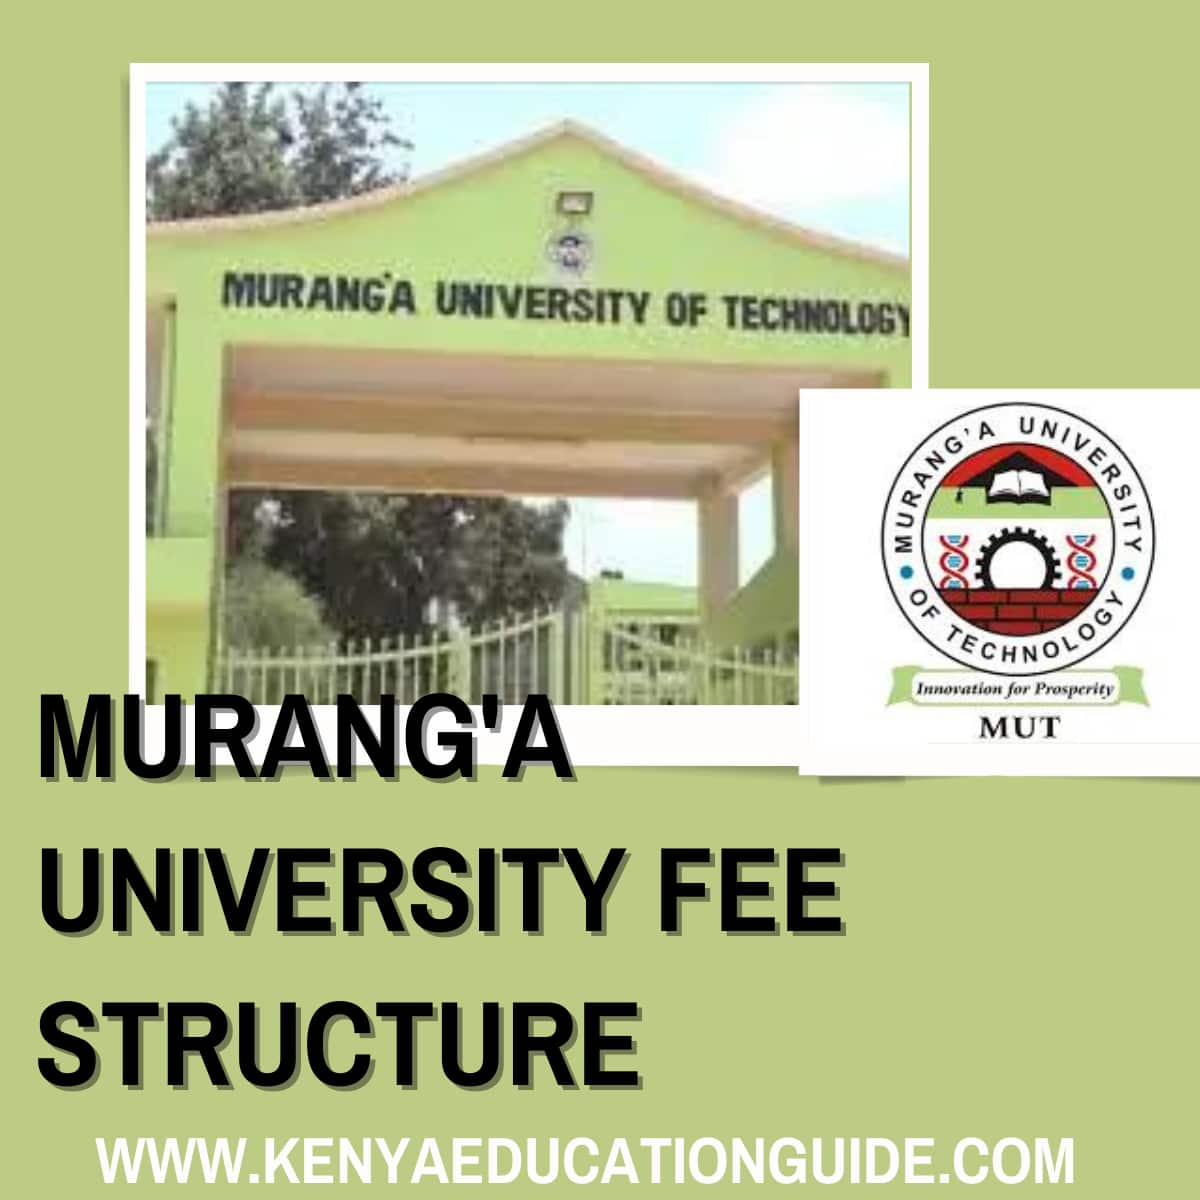 Murang’a University Fee Structure